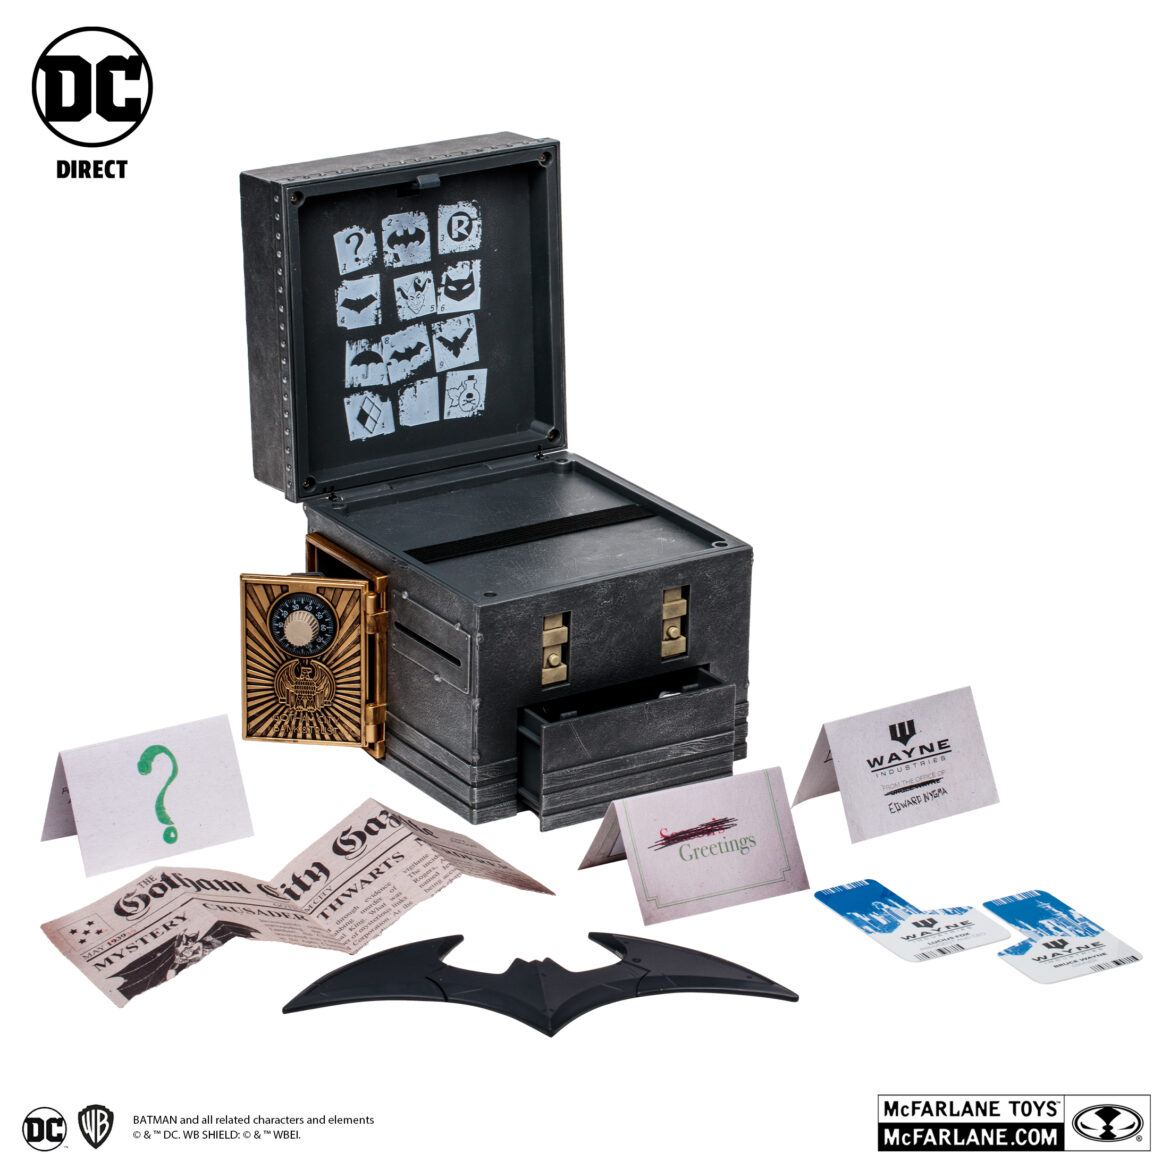 McFarlane Toys DC Direct The Riddler Puzzle Box